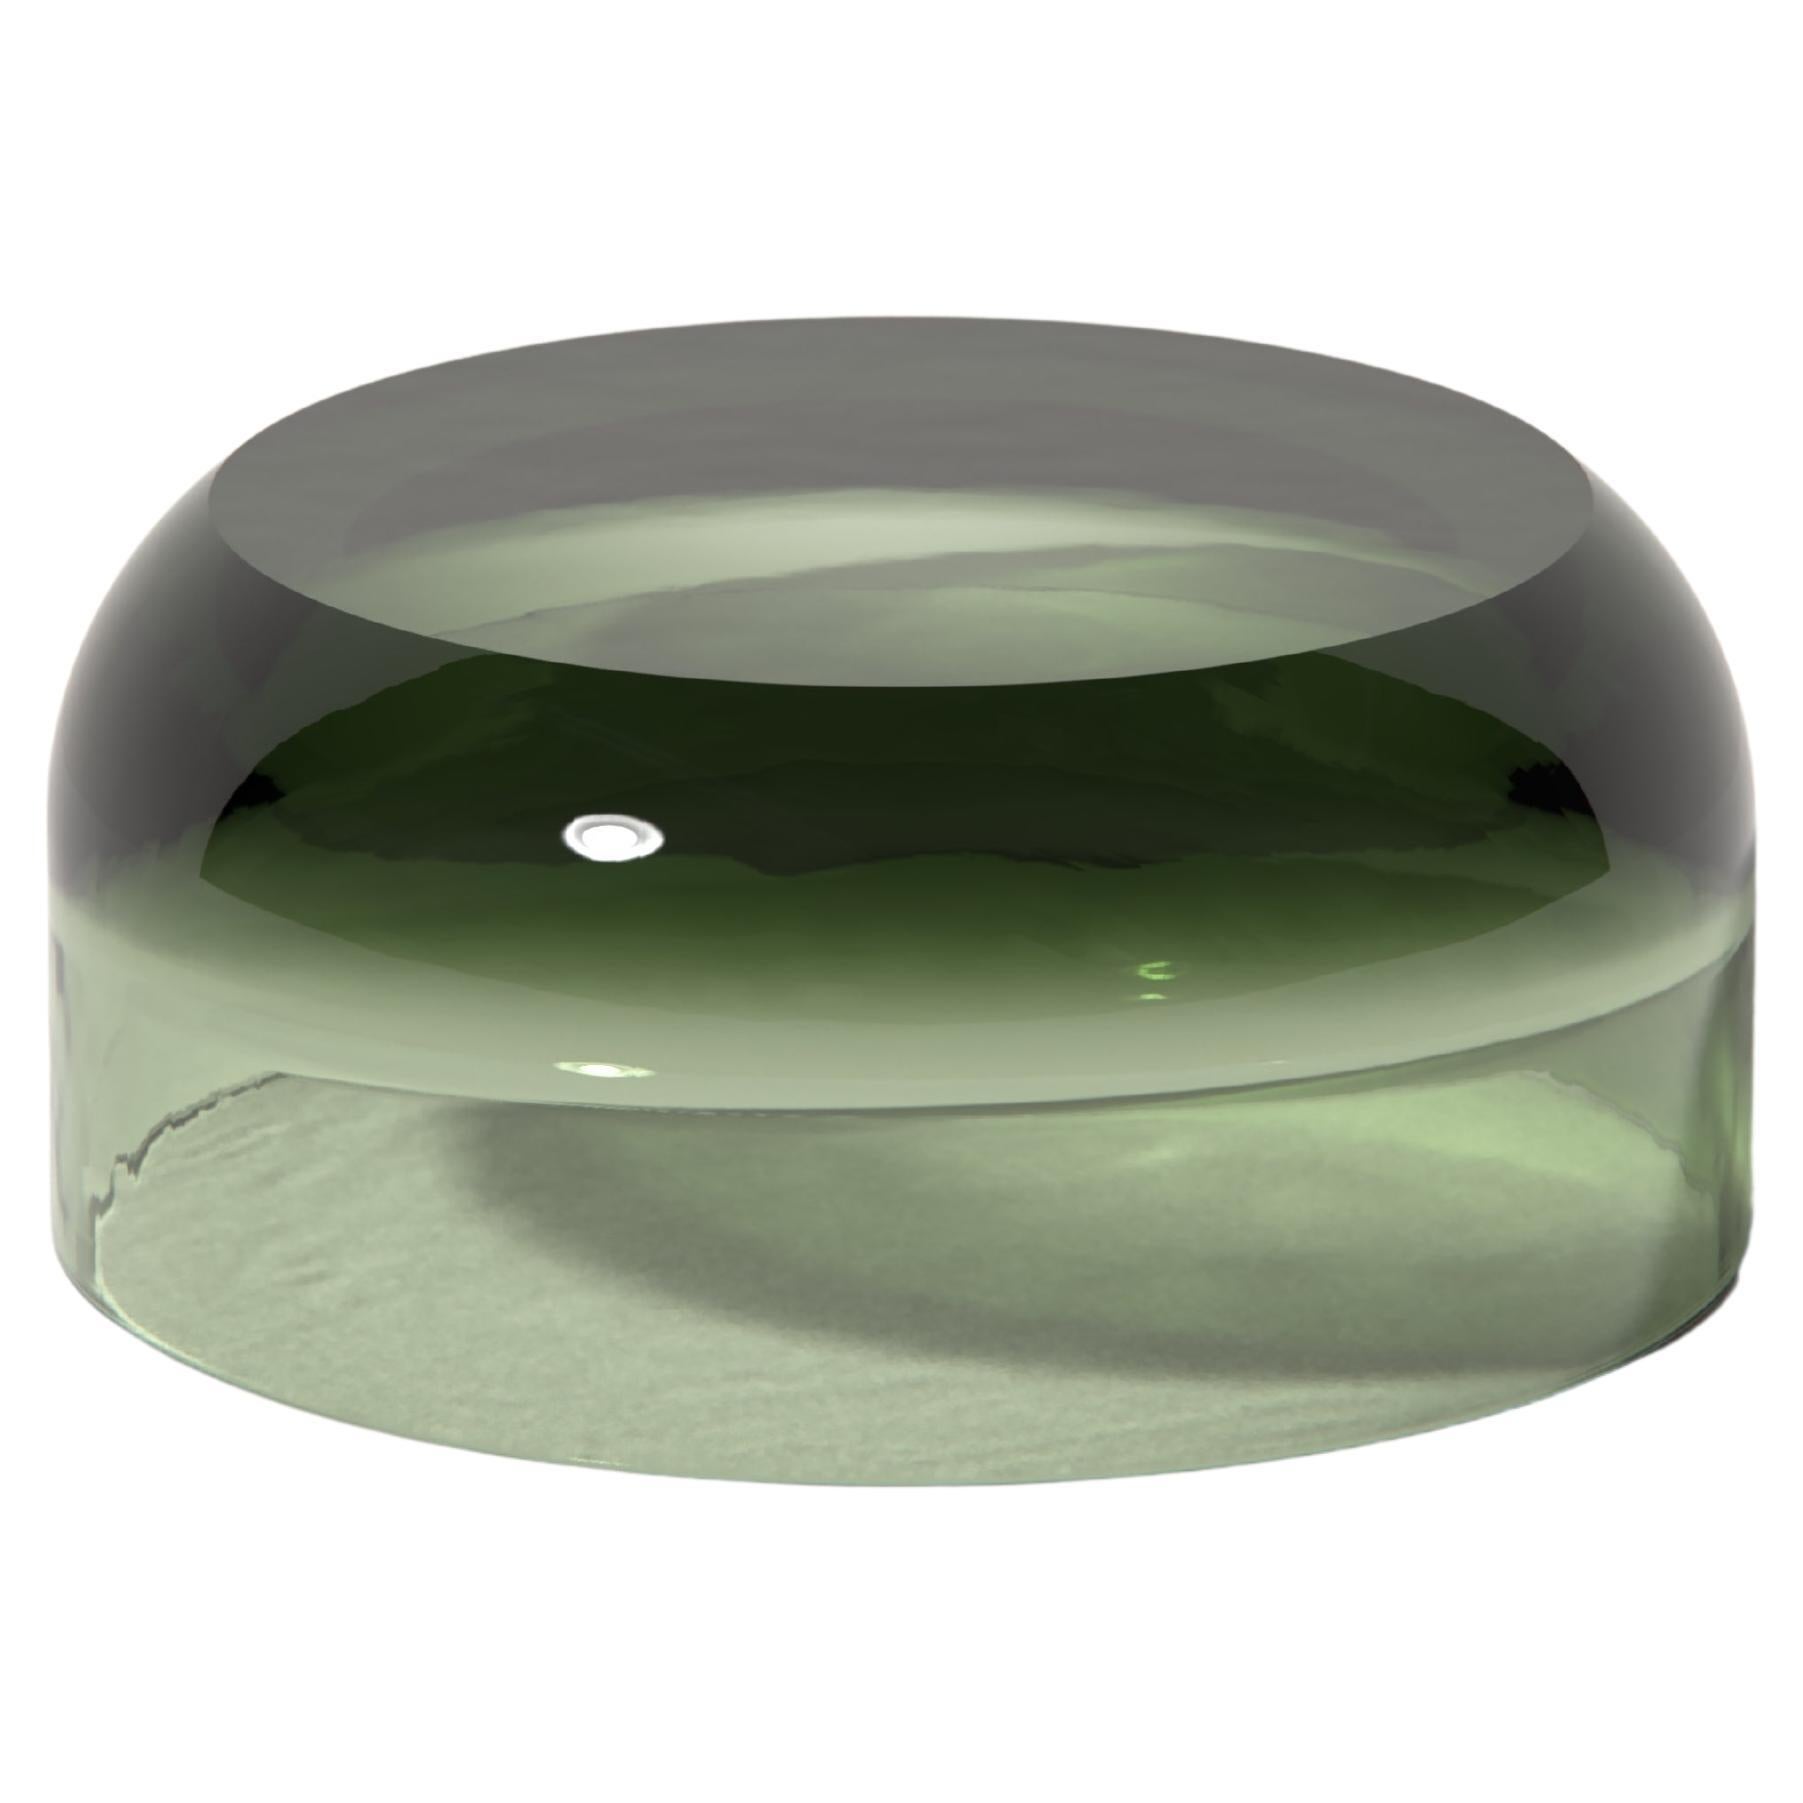 Big Dew Drop Resin Side Table, Ian Cochran, Represented by Tuleste Factory For Sale